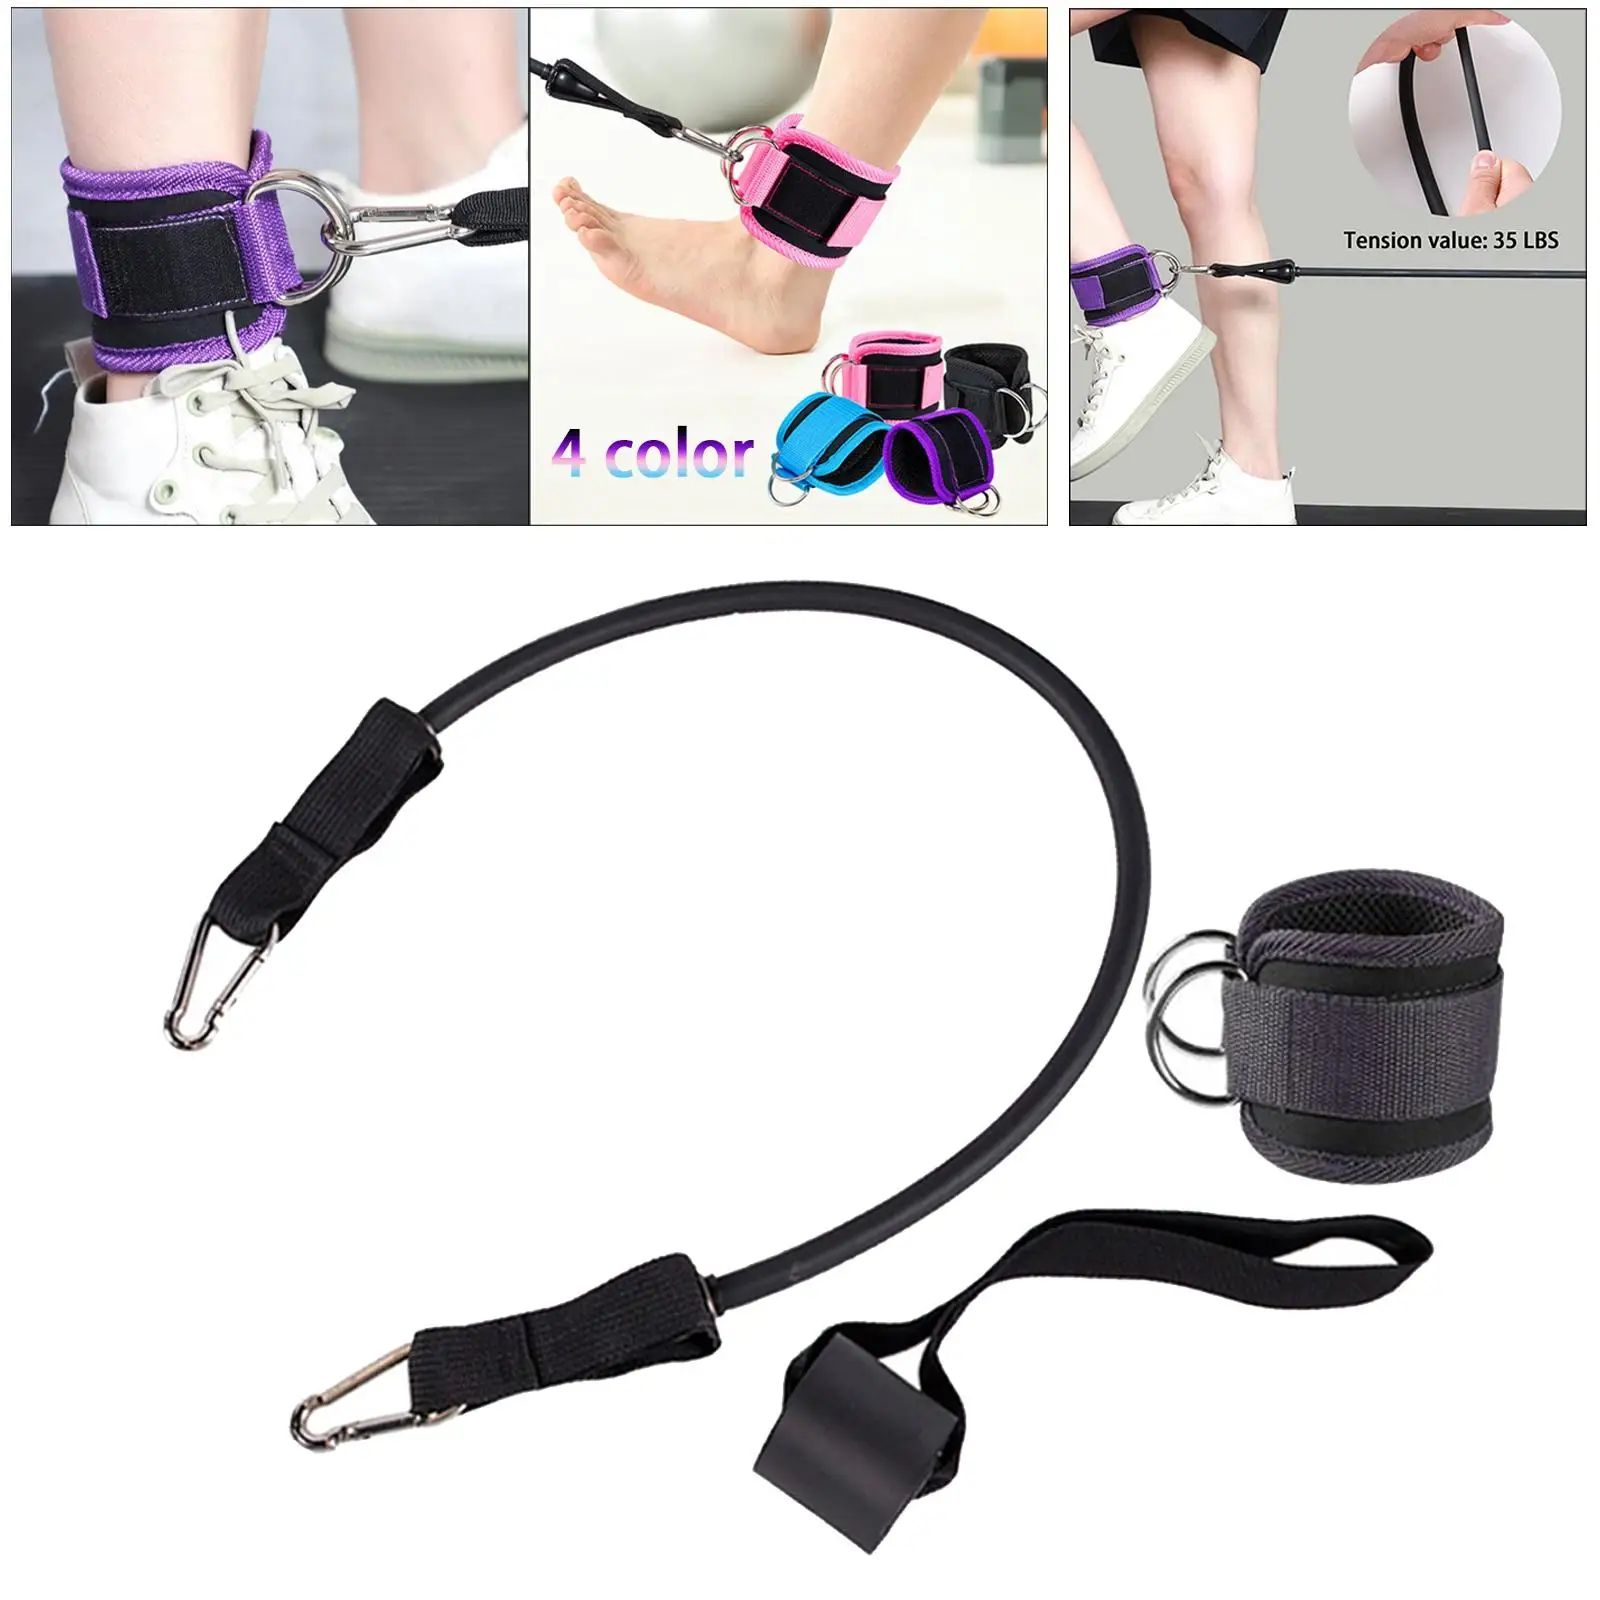 Resistance Band Set Ankle Strap Door Anchor Exercise Equipment Gym